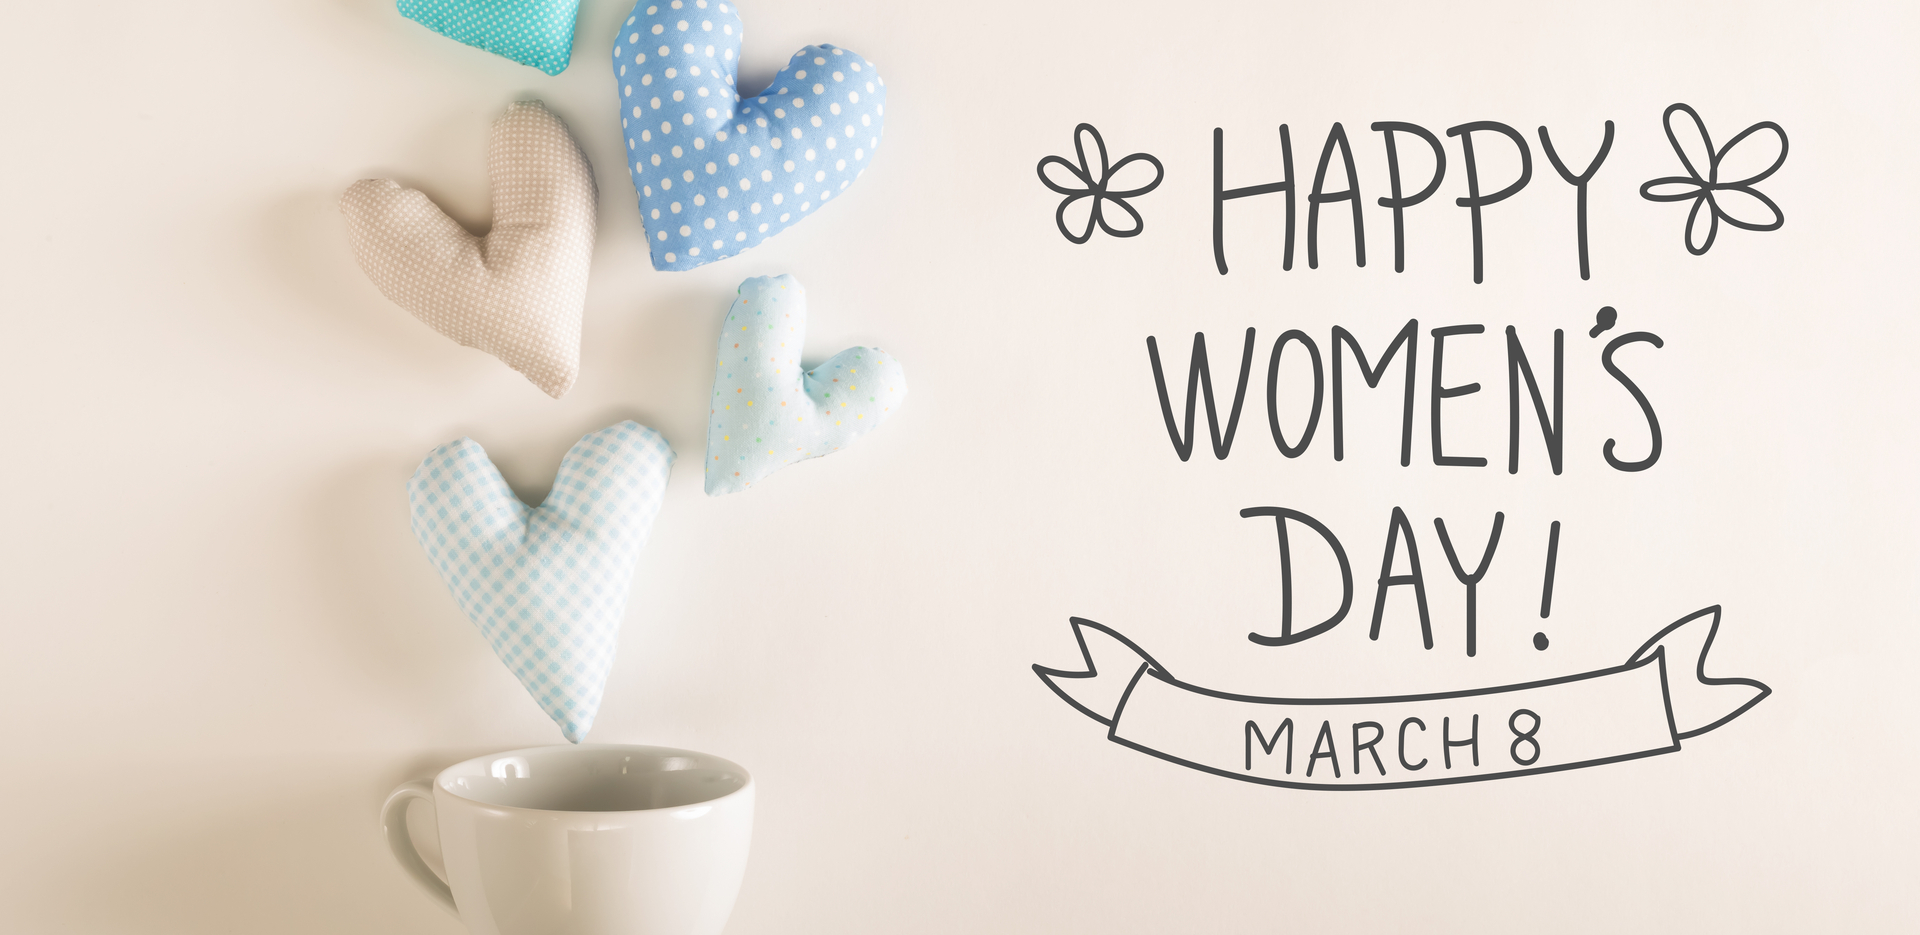 This Women’s Day, celebrate the woman in you with a well-deserved break